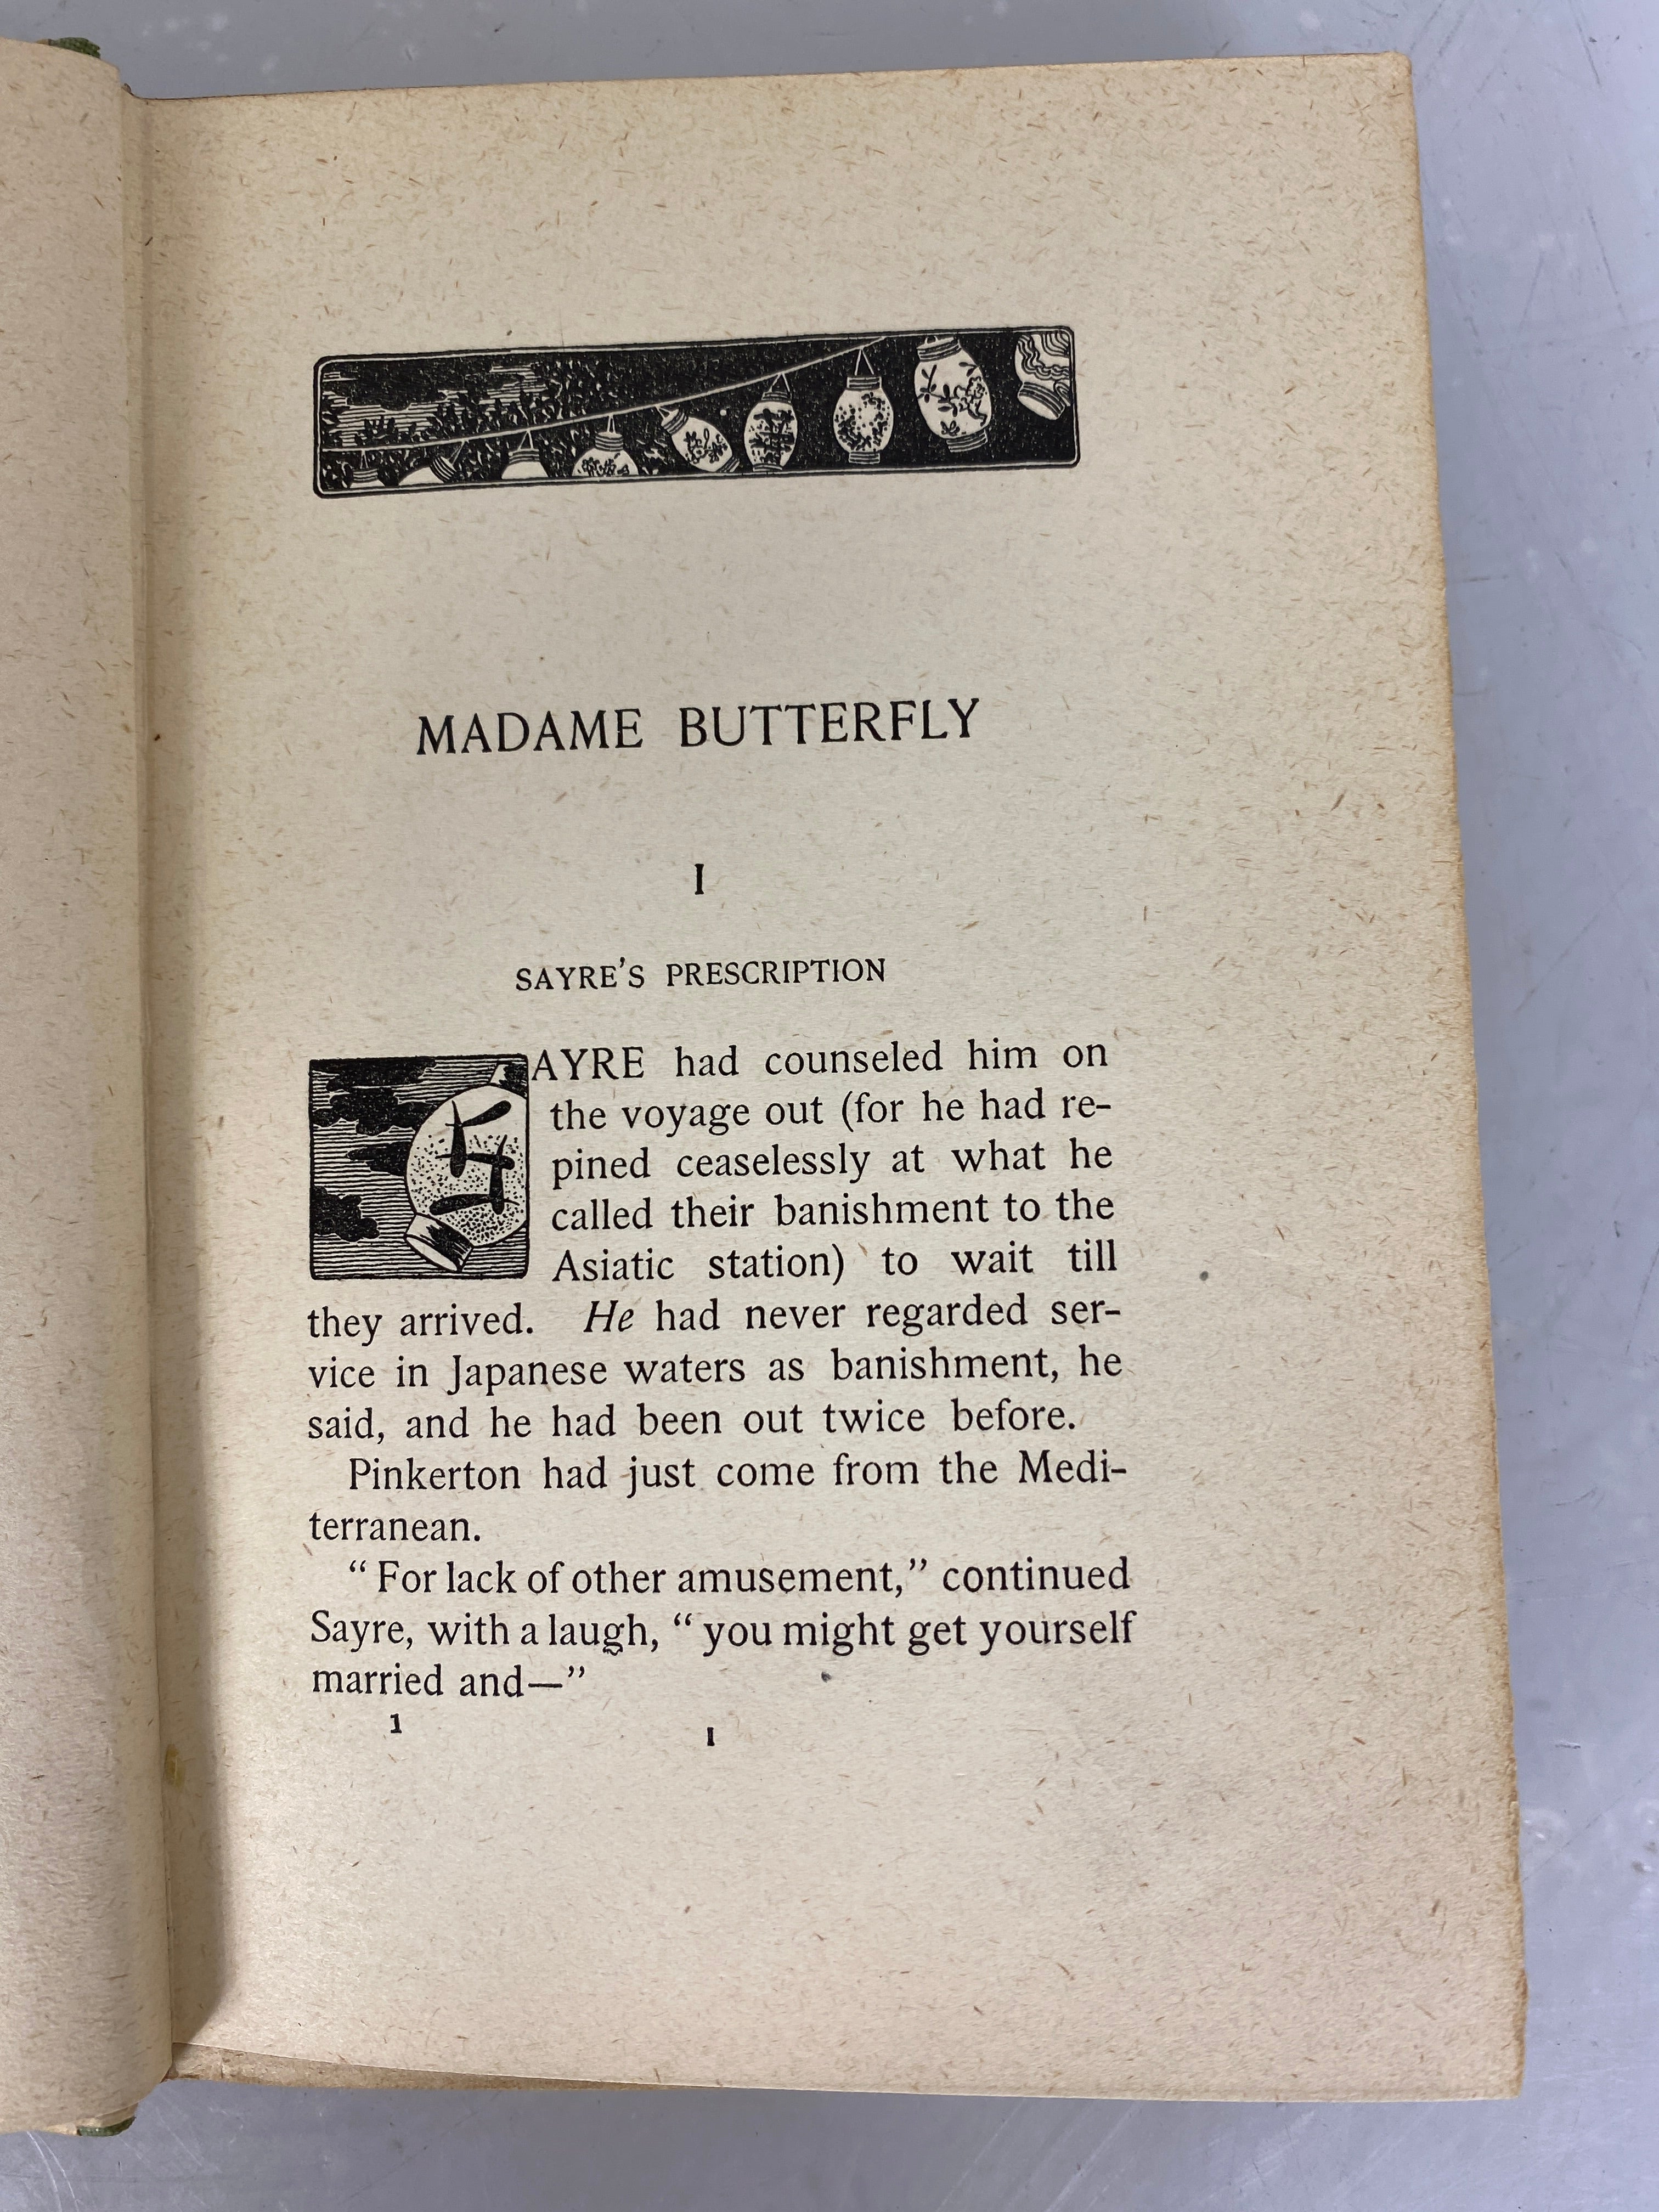 Madame Butterfly by John Luther Long 1900 HC